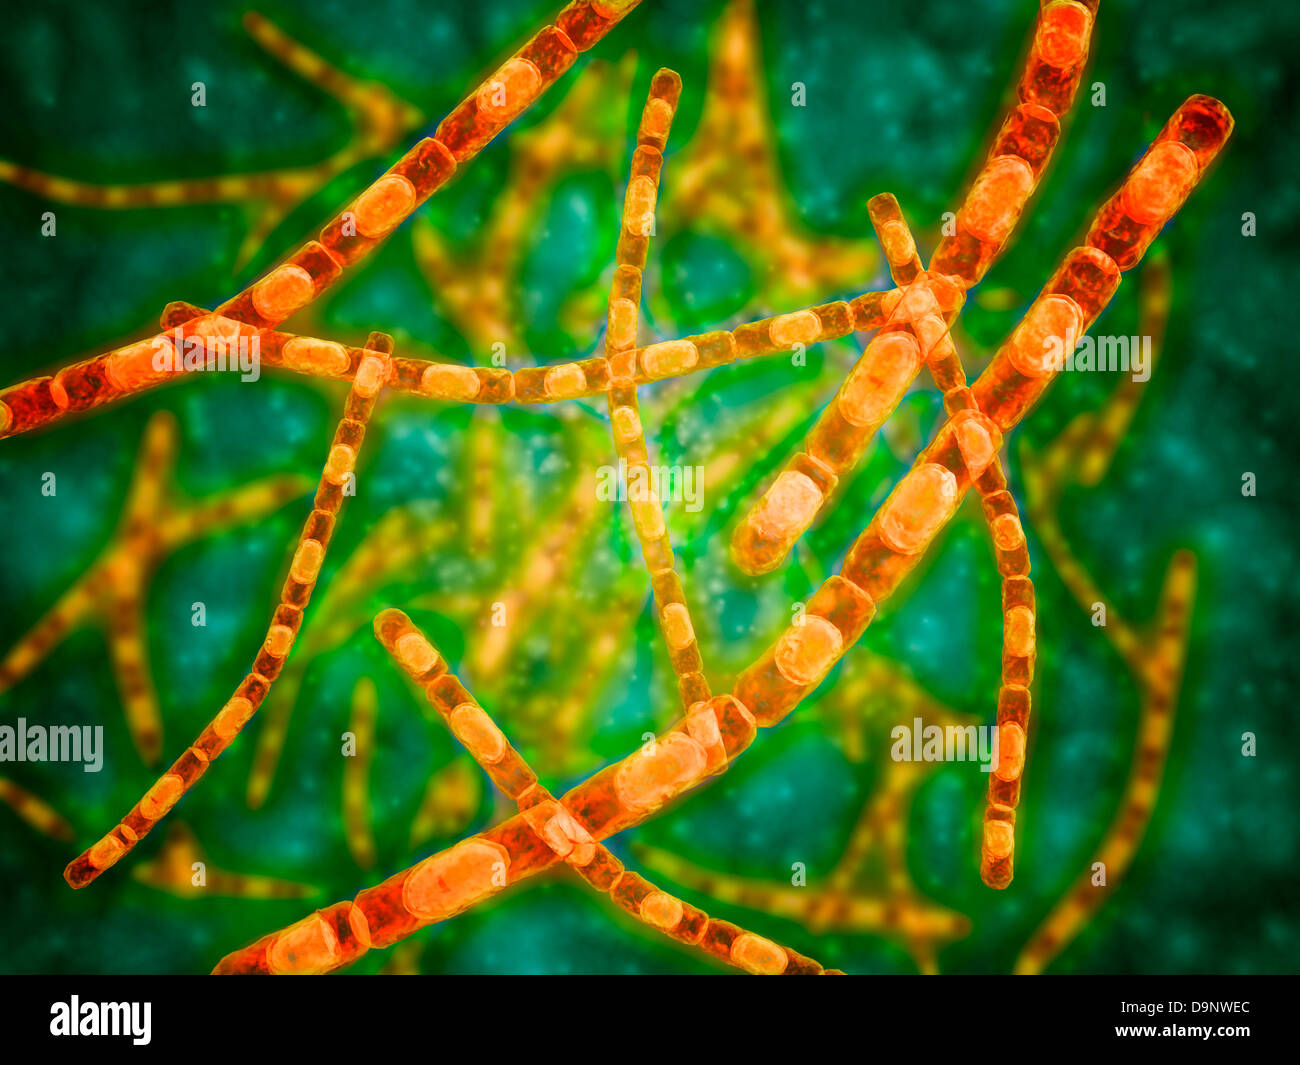 Microscopic view of Anthrax. Stock Photo